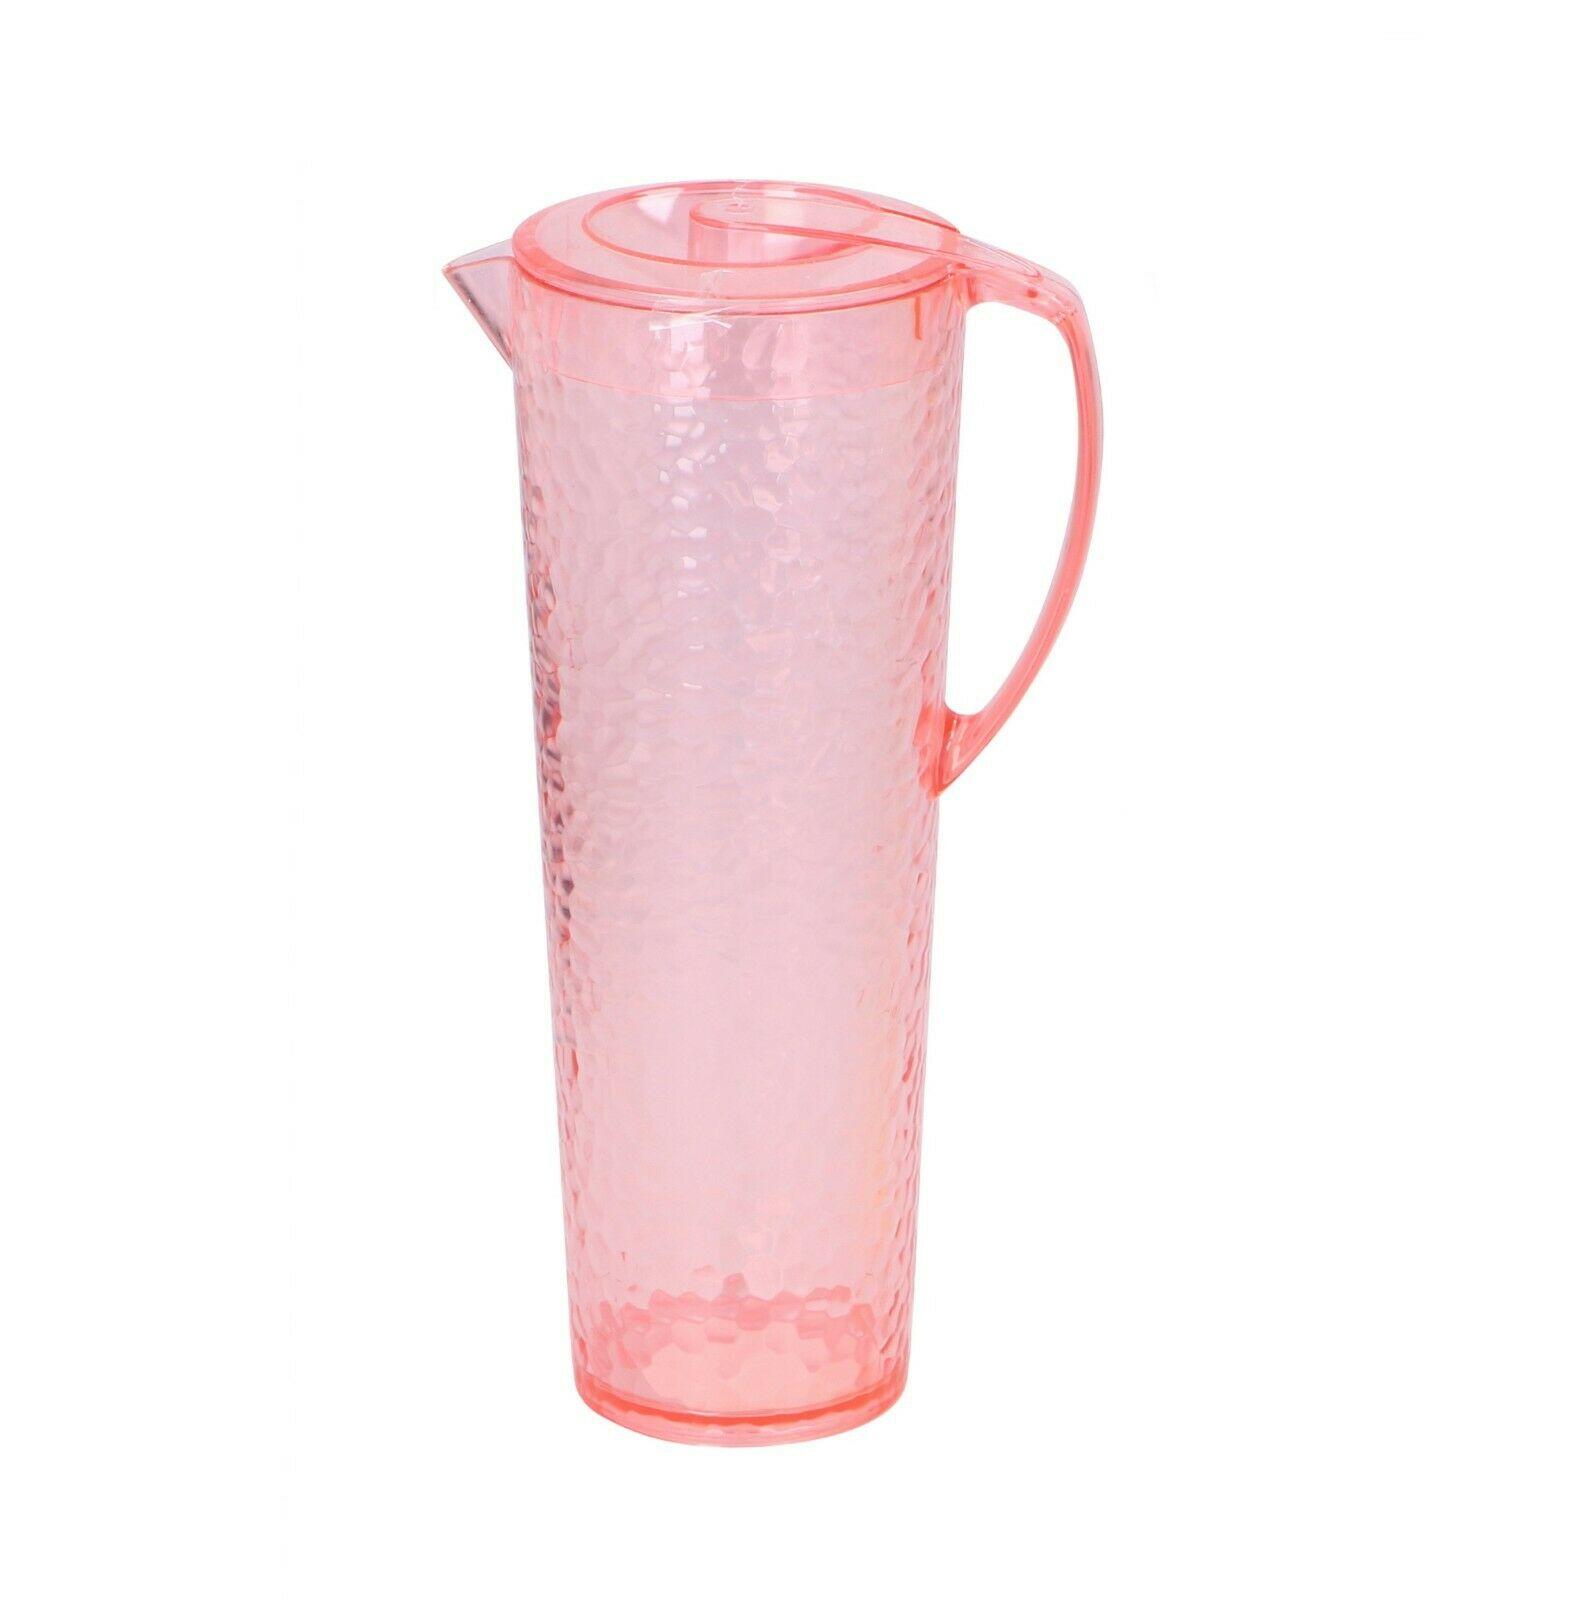 Kettle 1 Set Plastic Water Pitcher Cup Set Iced Tea Pitcher Lemonade Pitcher  Hot Cold Water Pitcher Drinking Glasses Nesting Cups For Home Kitchen Kit